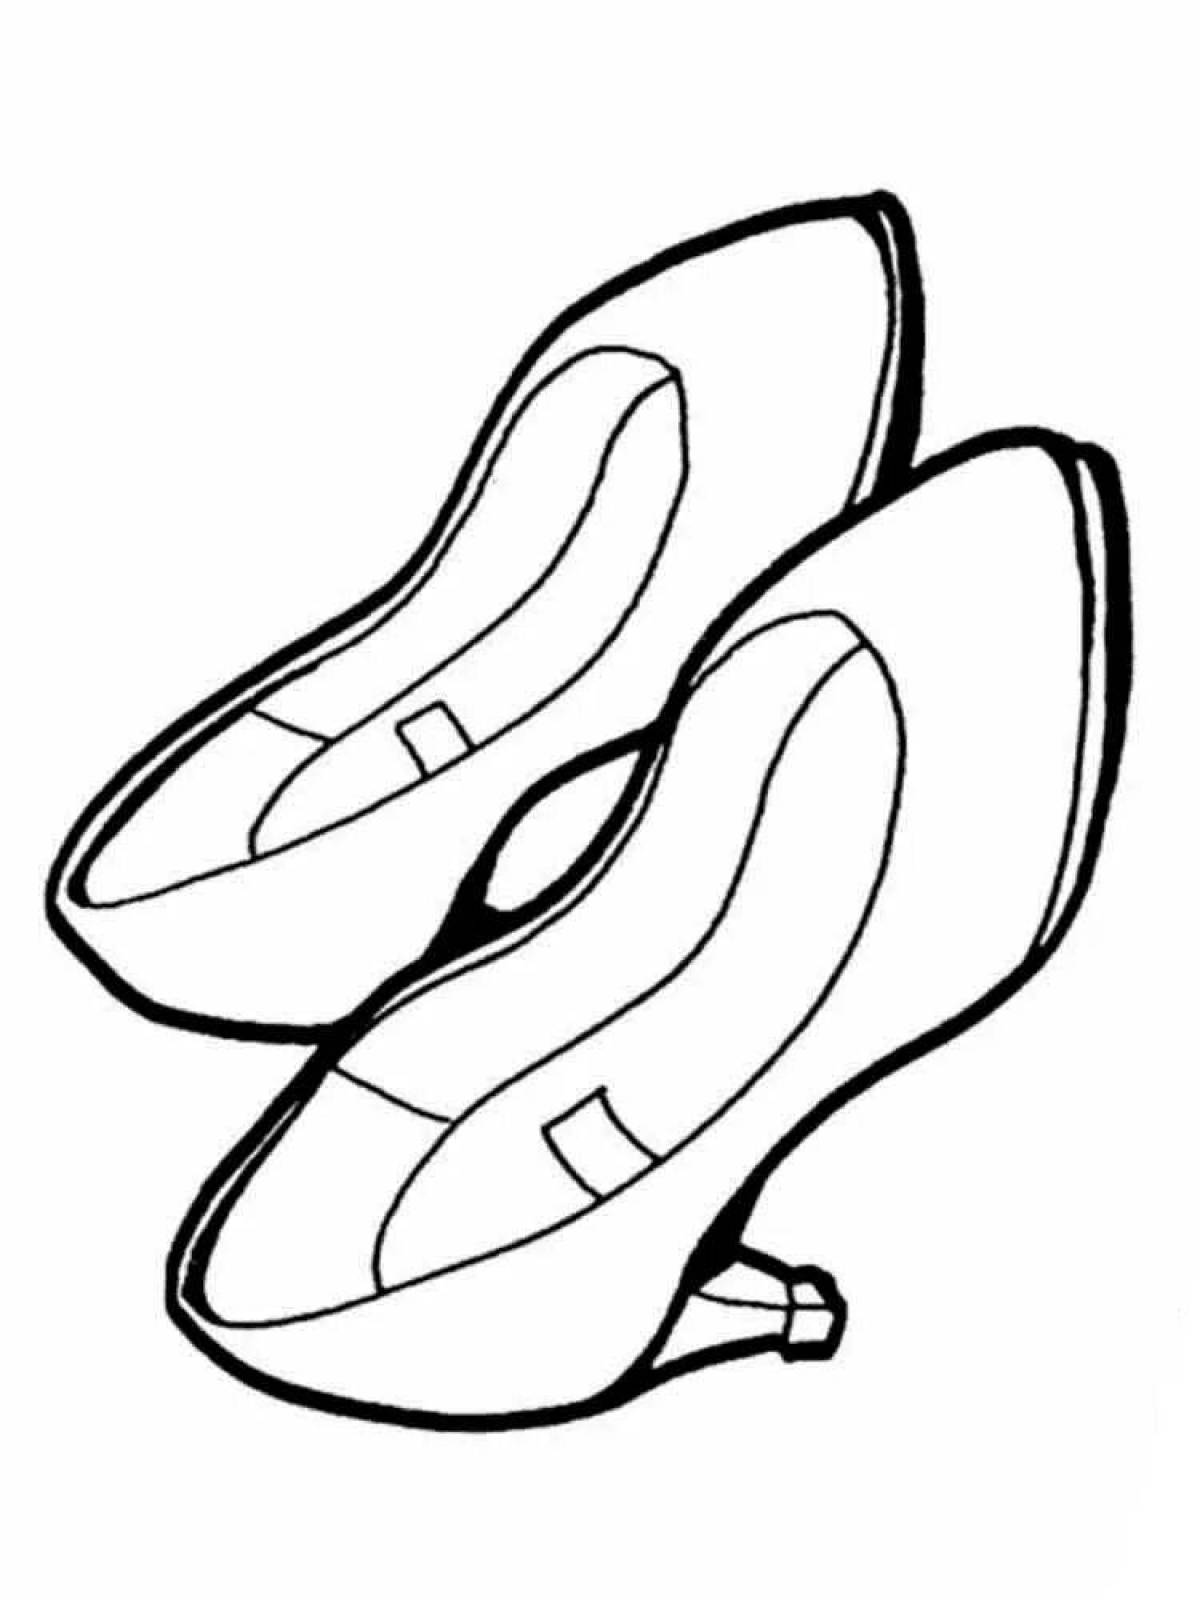 Coloring page sweet slippers